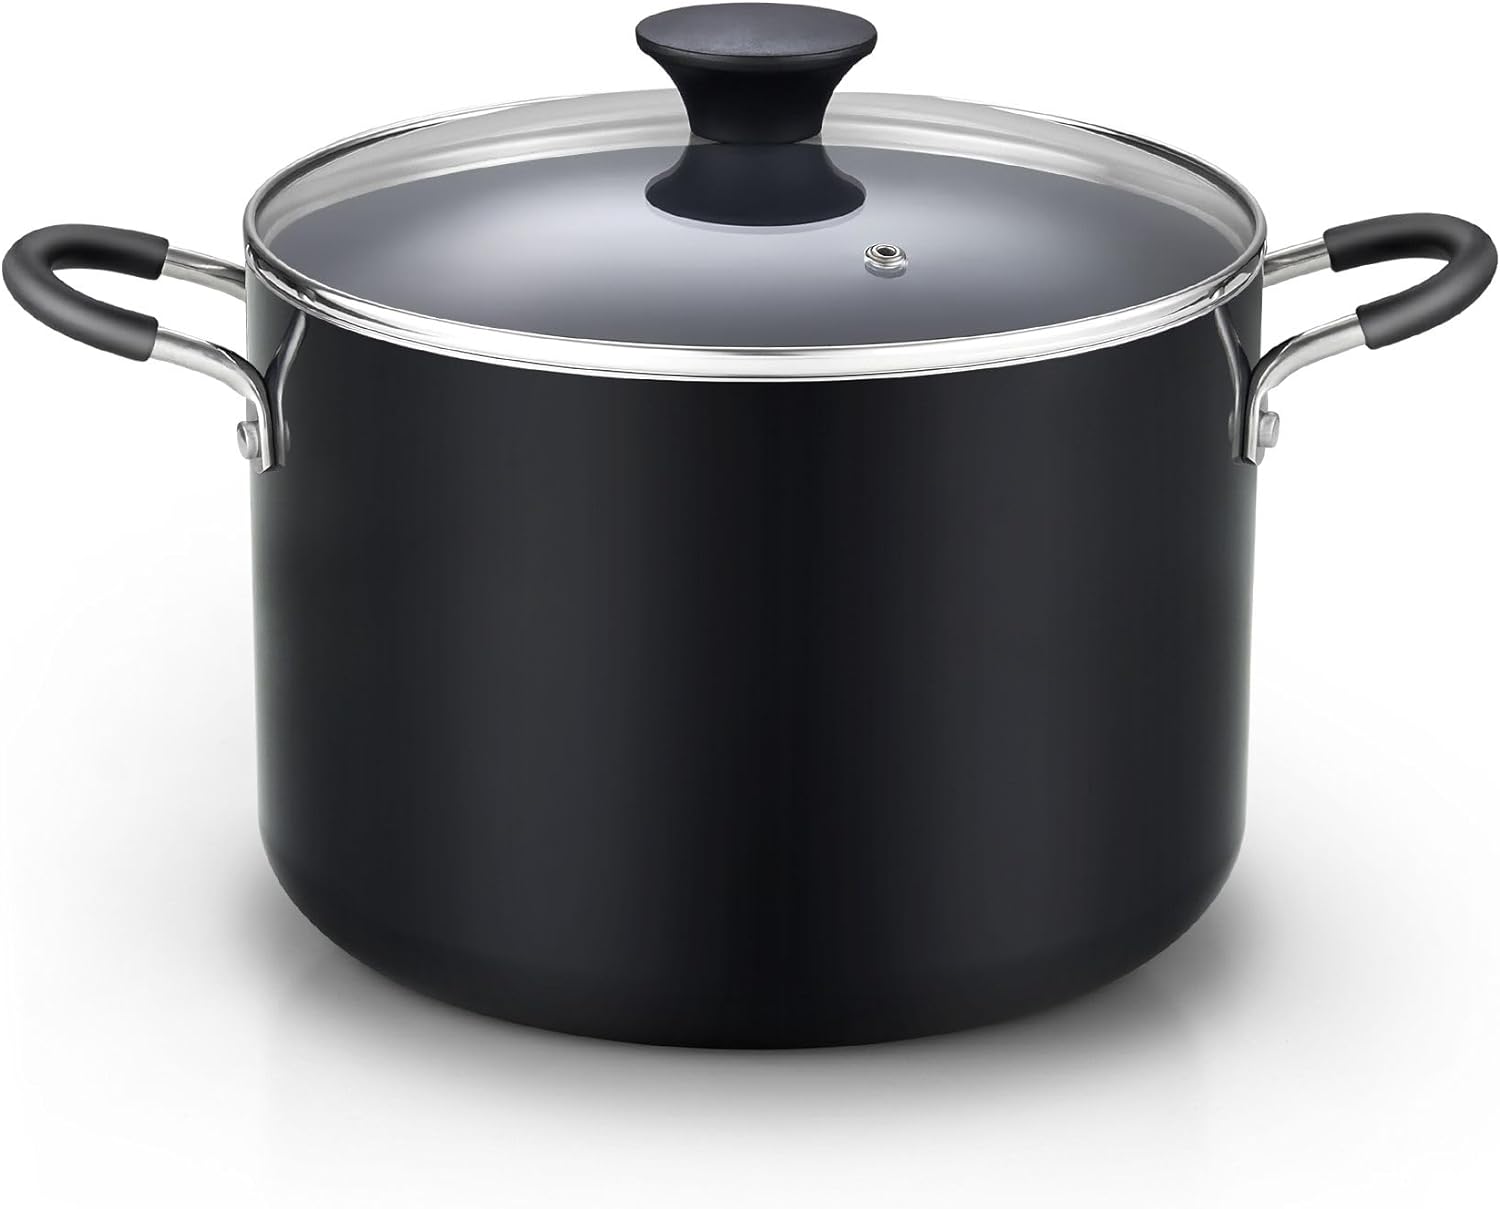 https://bigbigmart.com/wp-content/uploads/2023/11/Cook-N-Home-Nonstick-Stockpot-with-Lid-8-QT-Professional-Deep-Cooking-Pot-Canning-Cookware-Stock-Pot-with-Glass-Lid-Black.jpg